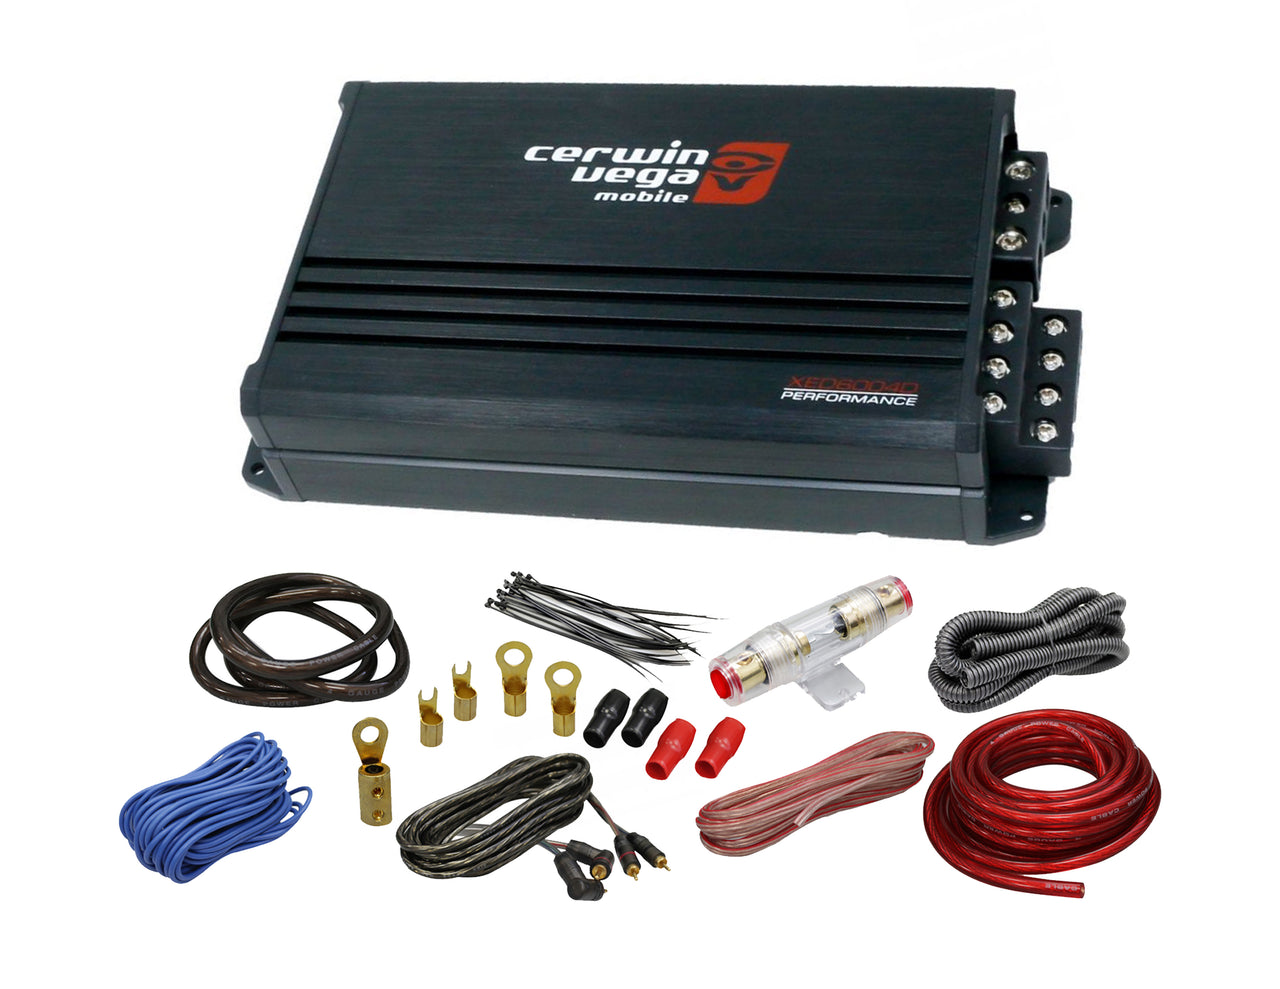 Cerwin Vega XED6004D 500W MAX 4 Channel XED Series Car Micro Compact Amplifier + 4 Gauge Amp Kit